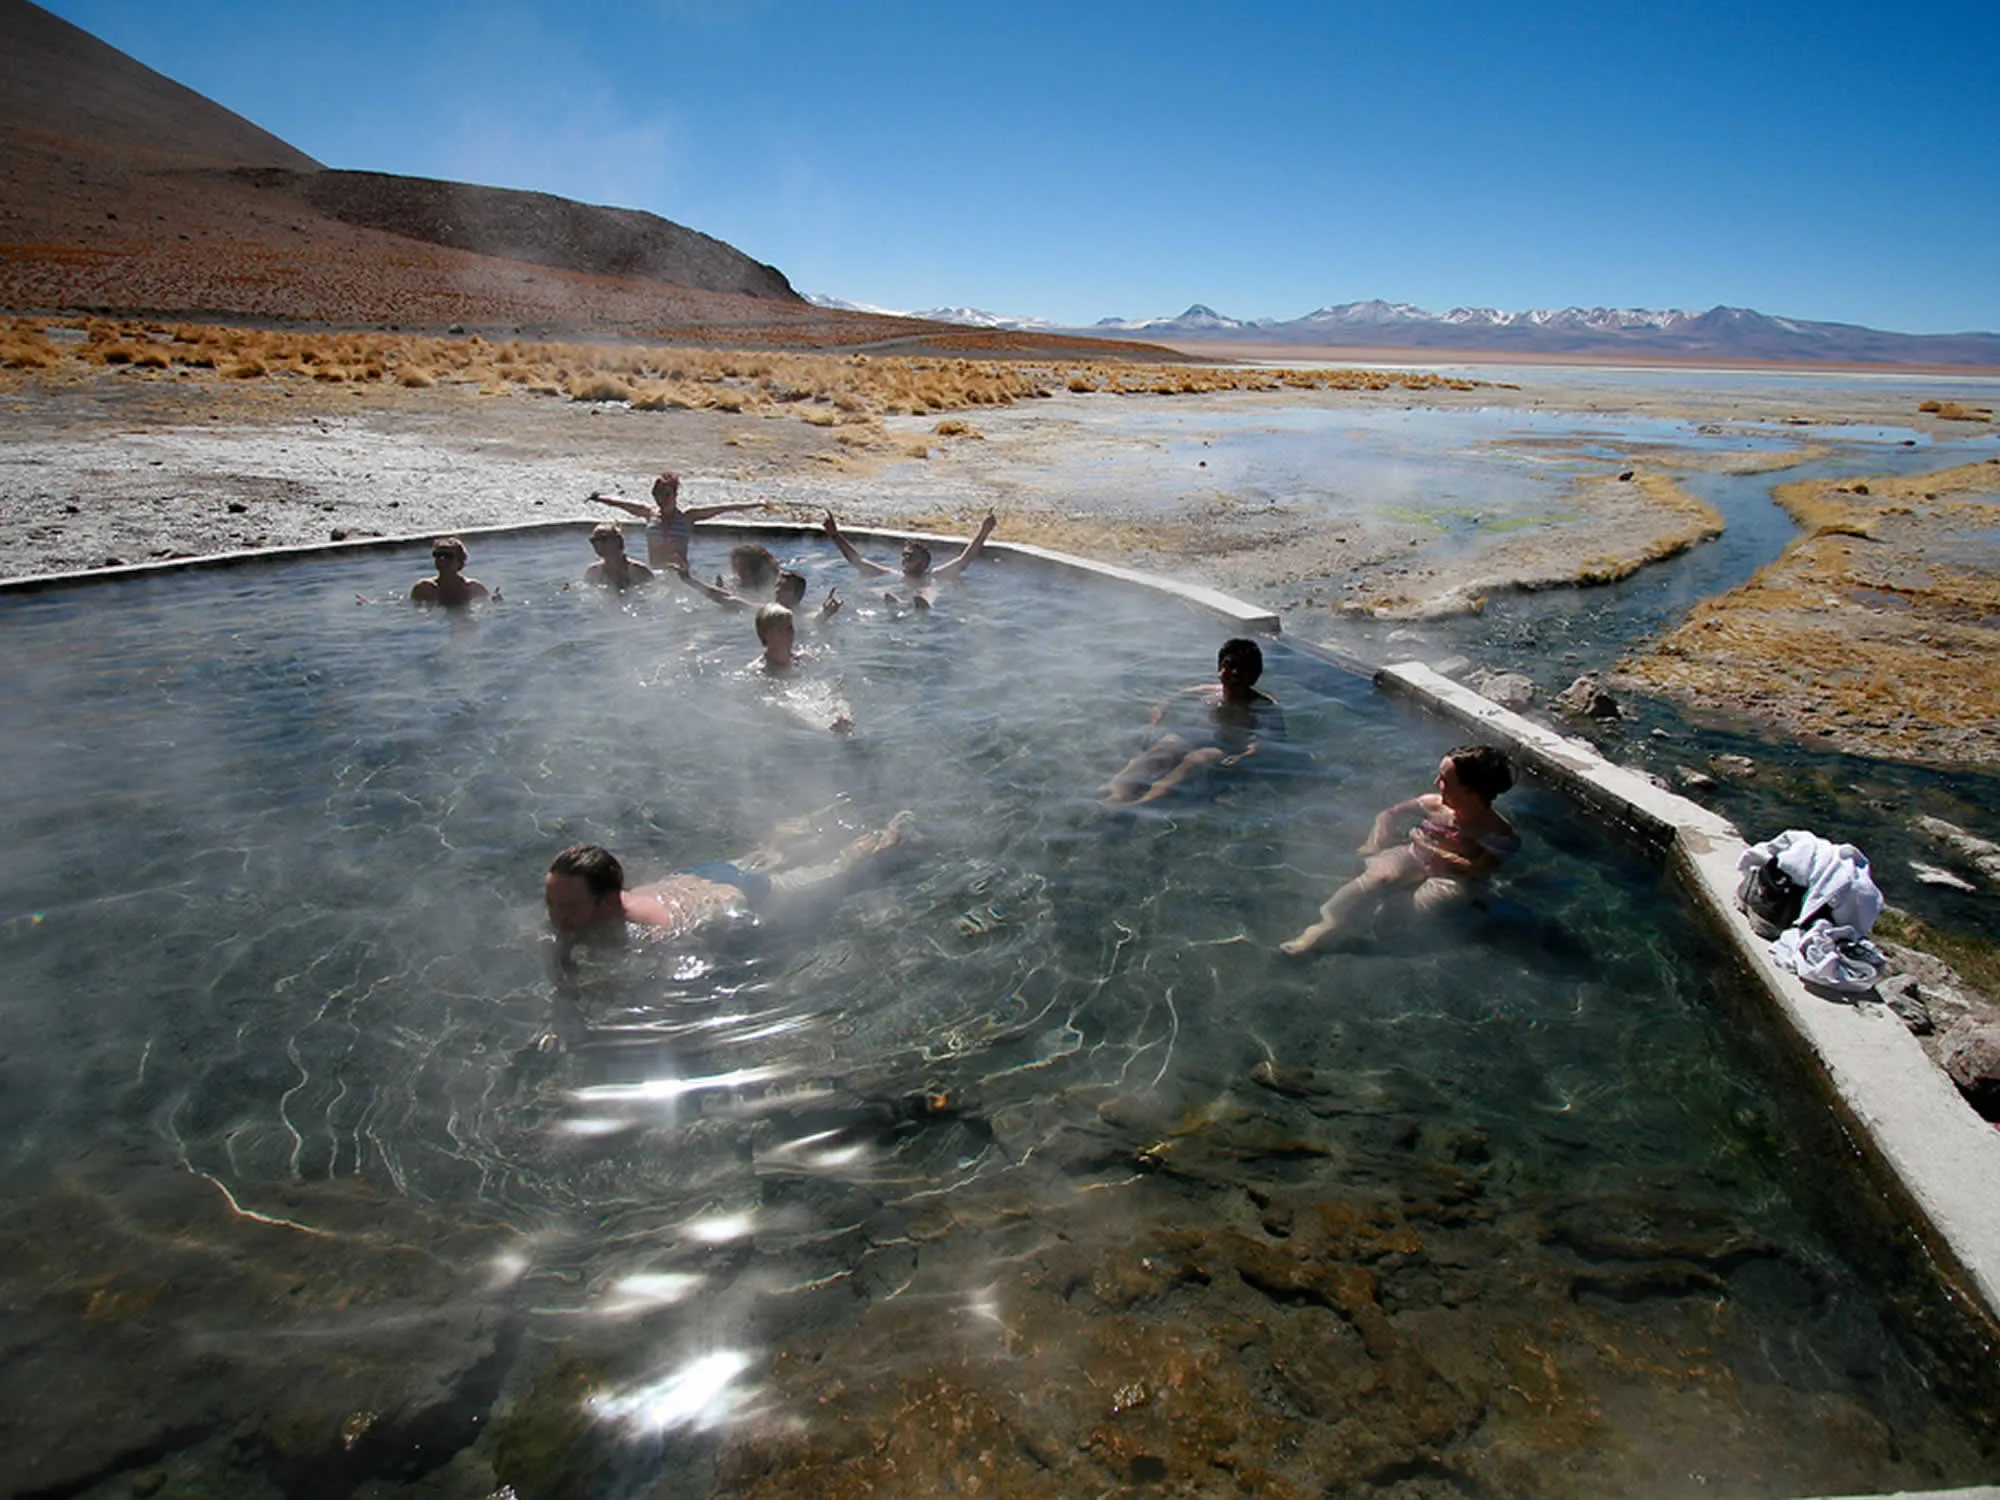 Polques Hot Springs in Bolivia, South America | Volcanos,Hot Springs & Pools - Rated 0.9